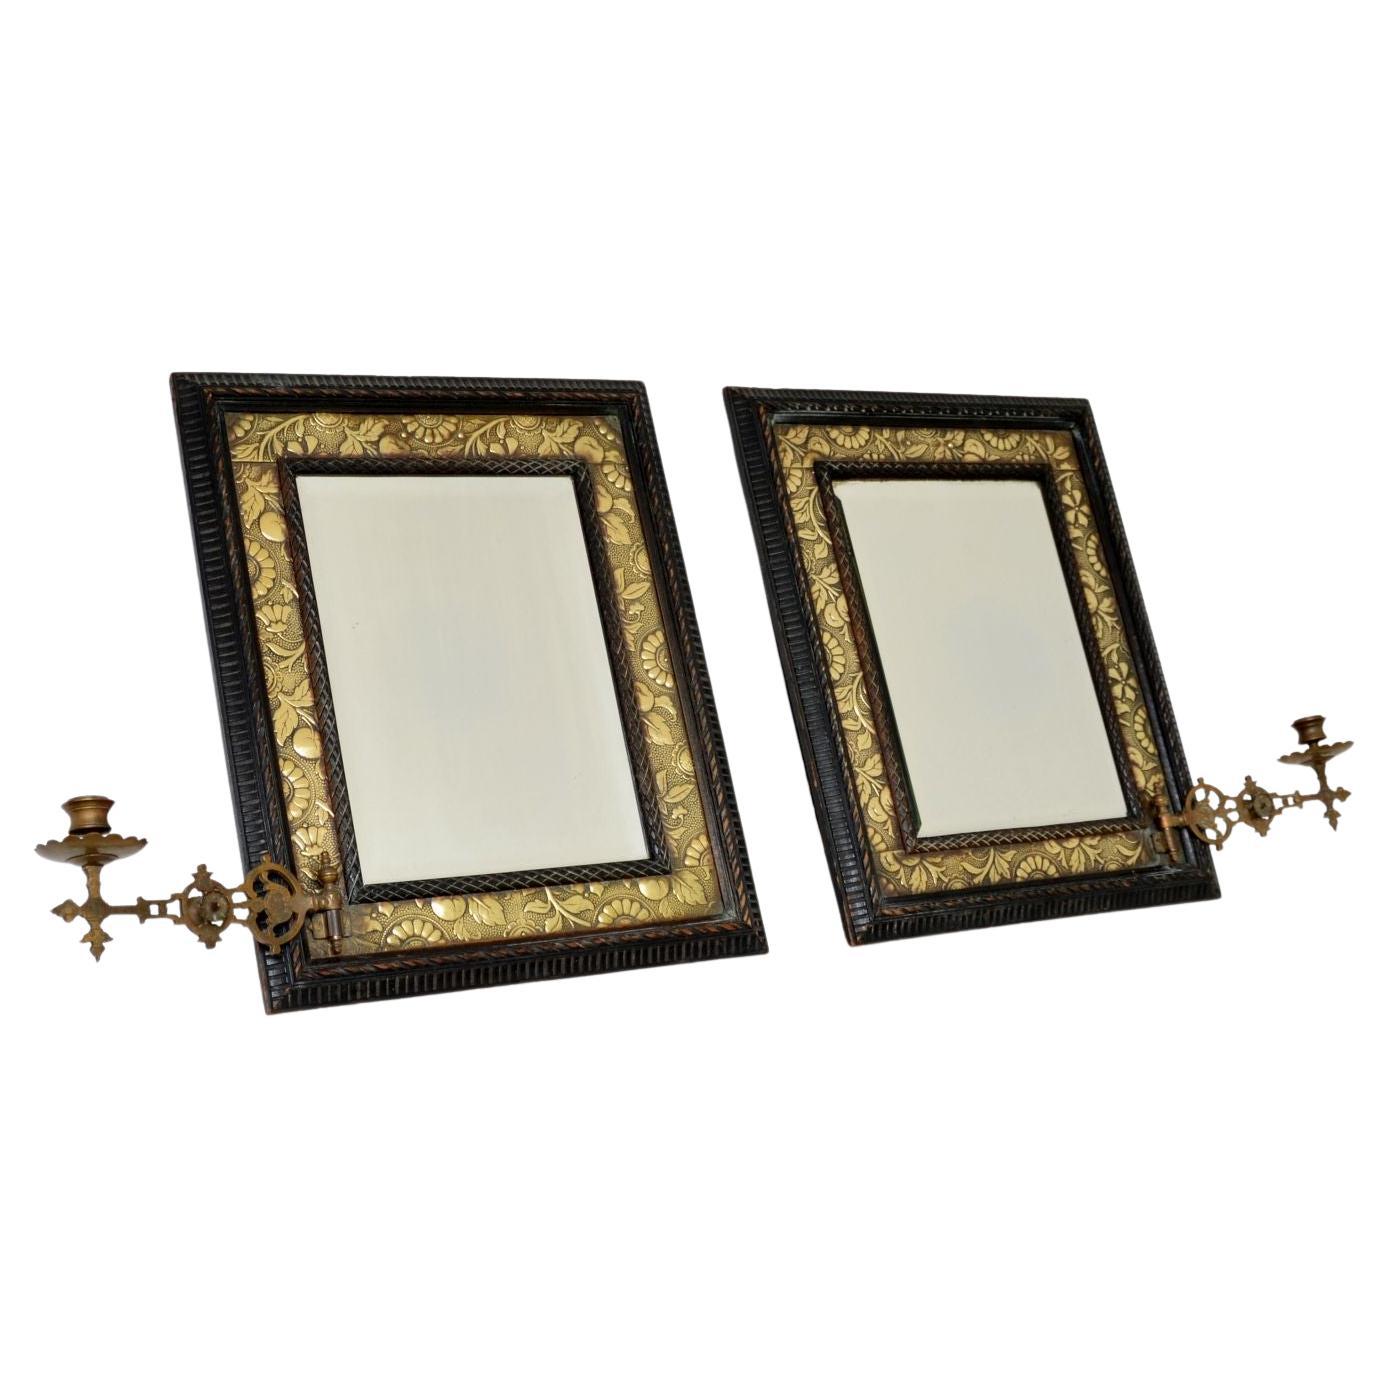 Pair of Antique Victorian Brass & Wood Mirrors